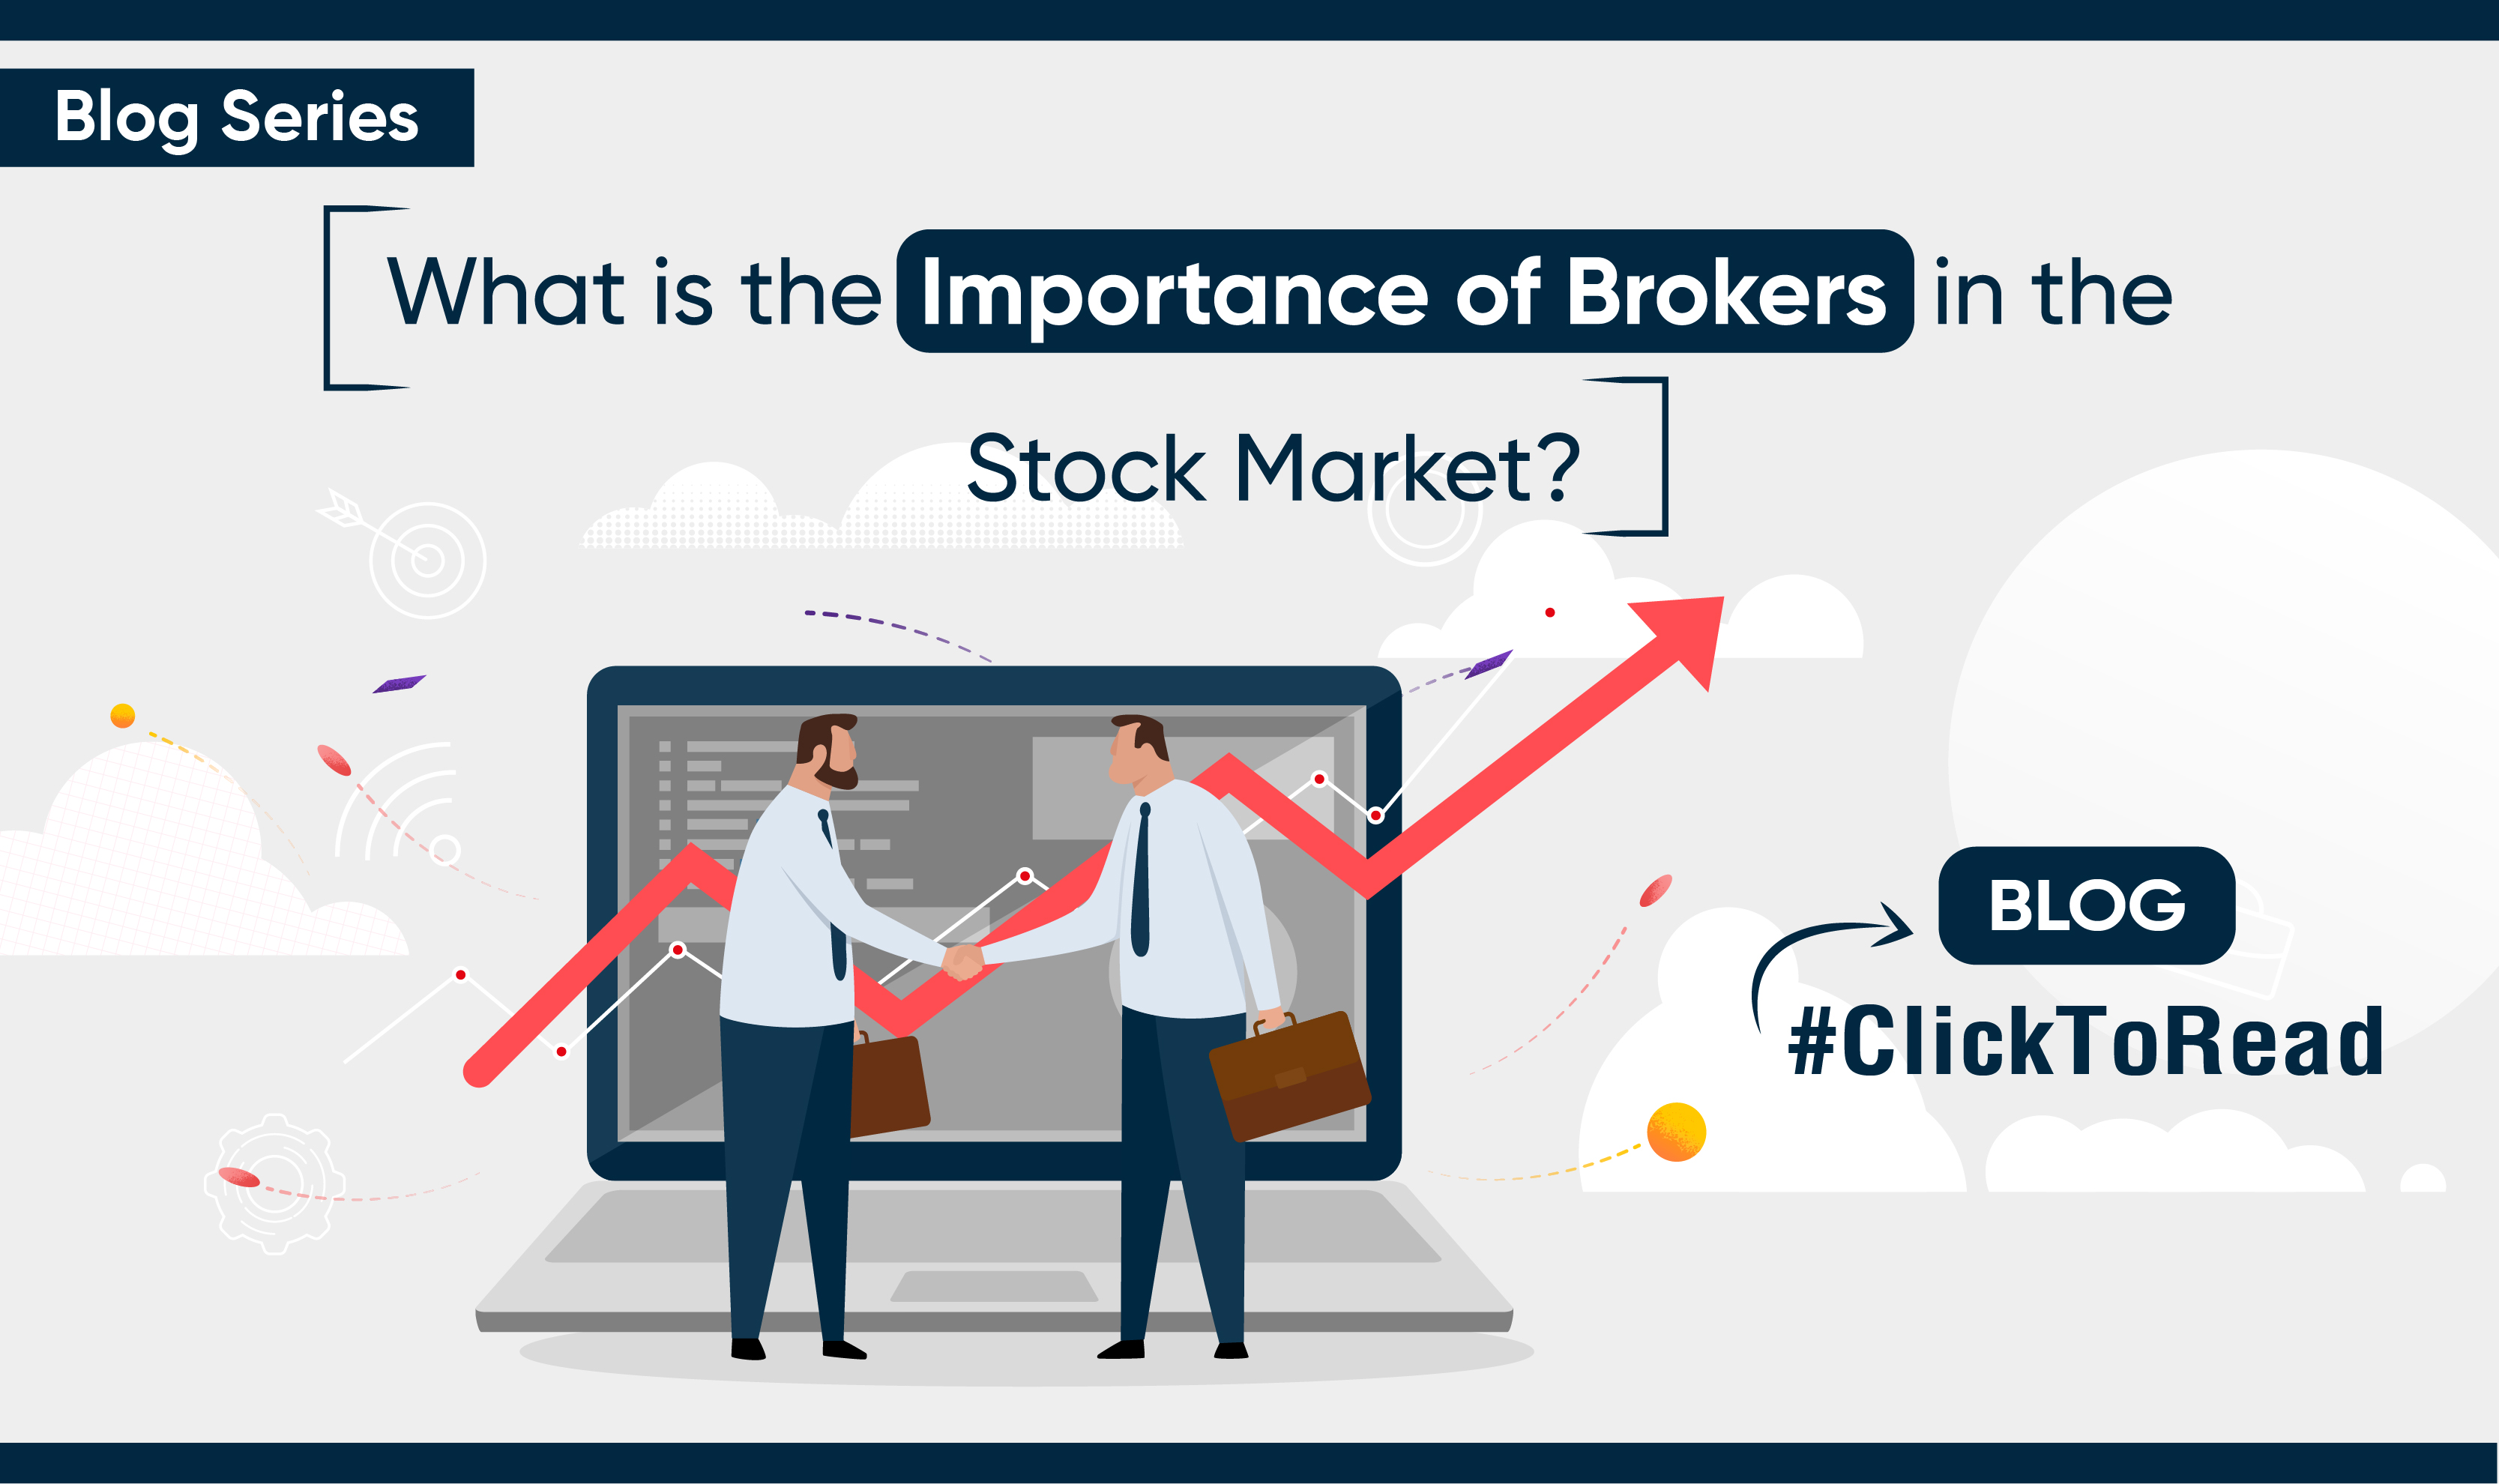 What is the Role and Importance of Brokers in the Stock Market?